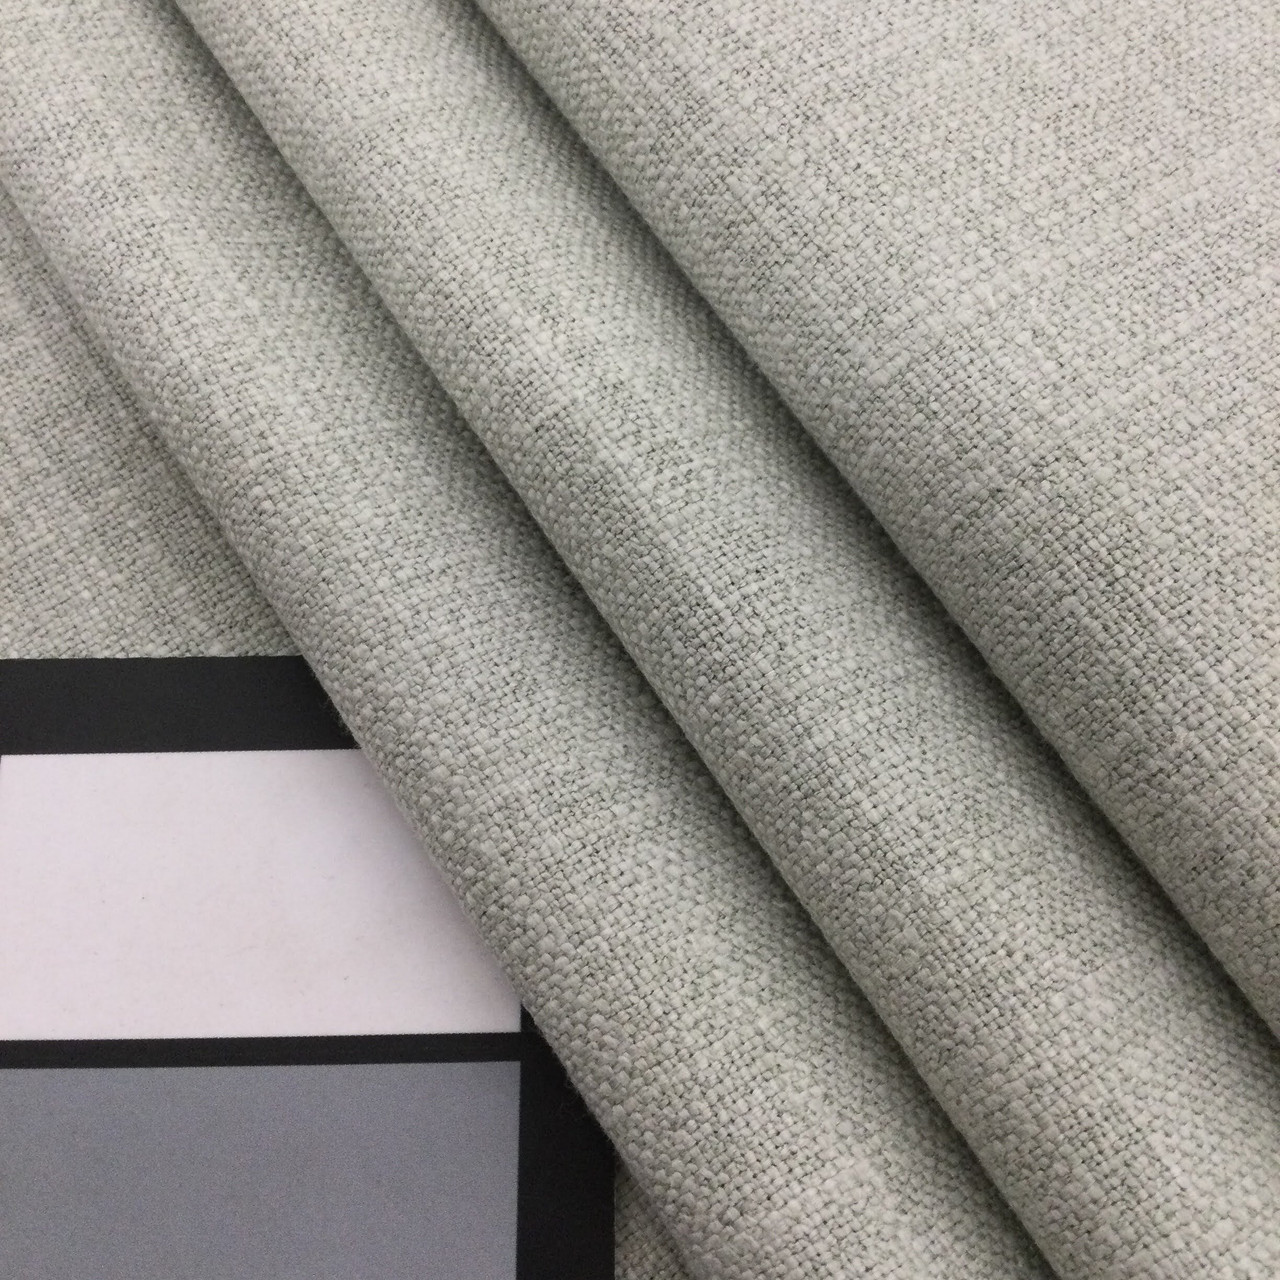 Linen Fabric Slub Weave in Light Green, Upholstery / Slipcovers / Curtains, Poly / Cotton / Linen Blend, 55 Wide, By the Yard